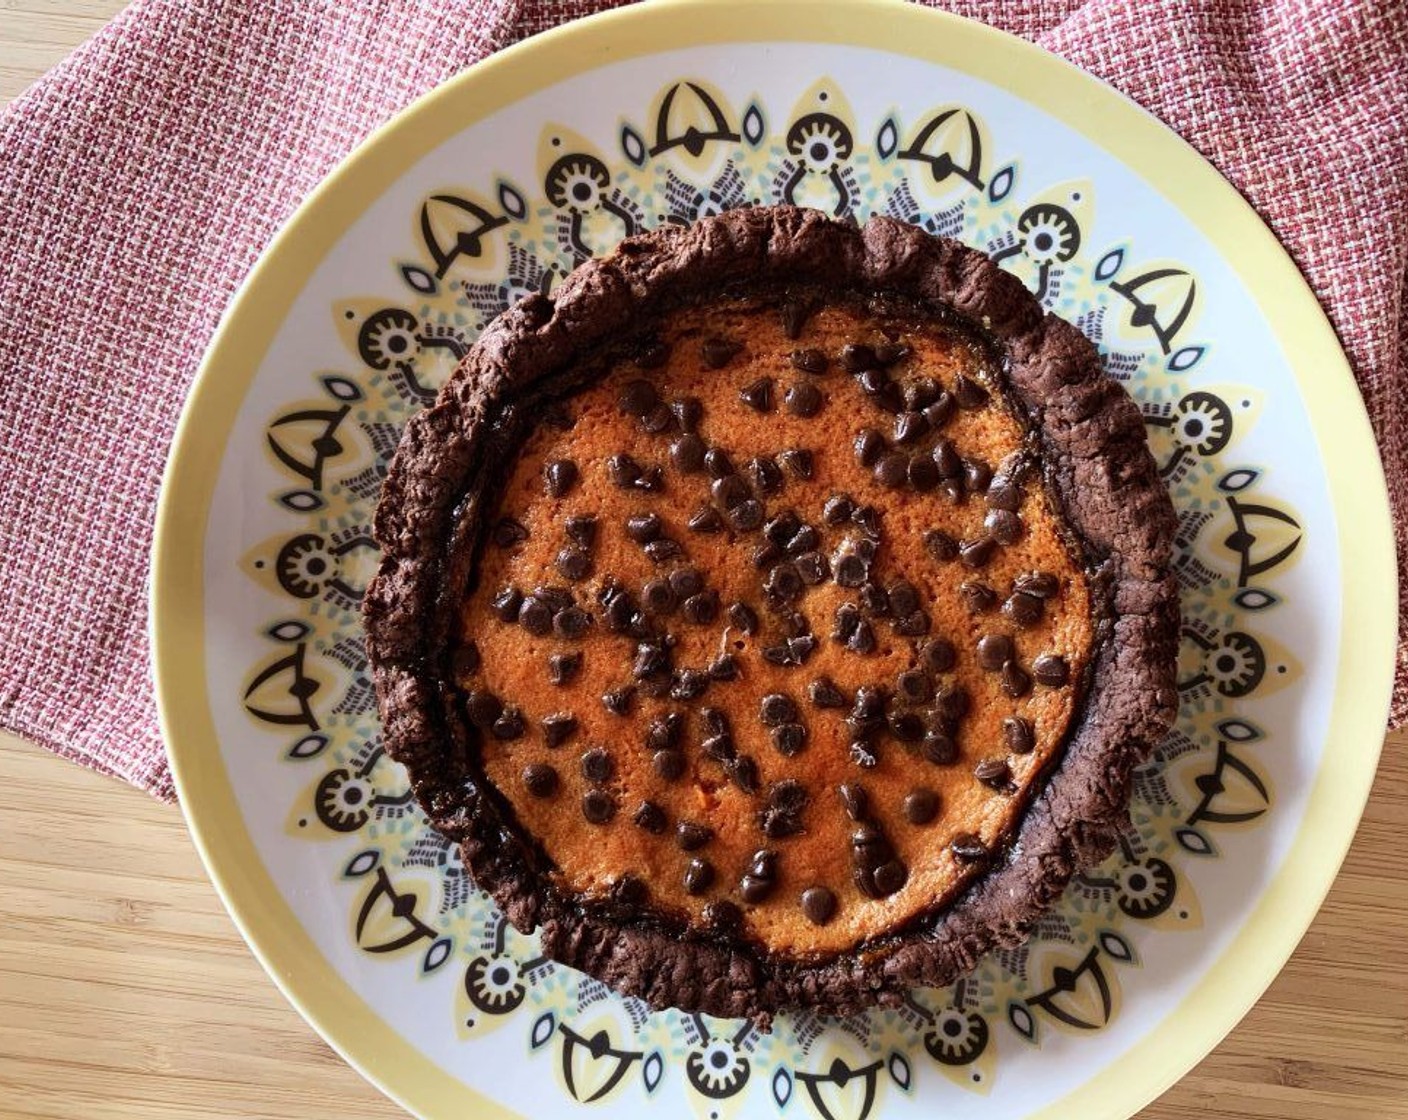 Chocolate Prickly Pear Pie